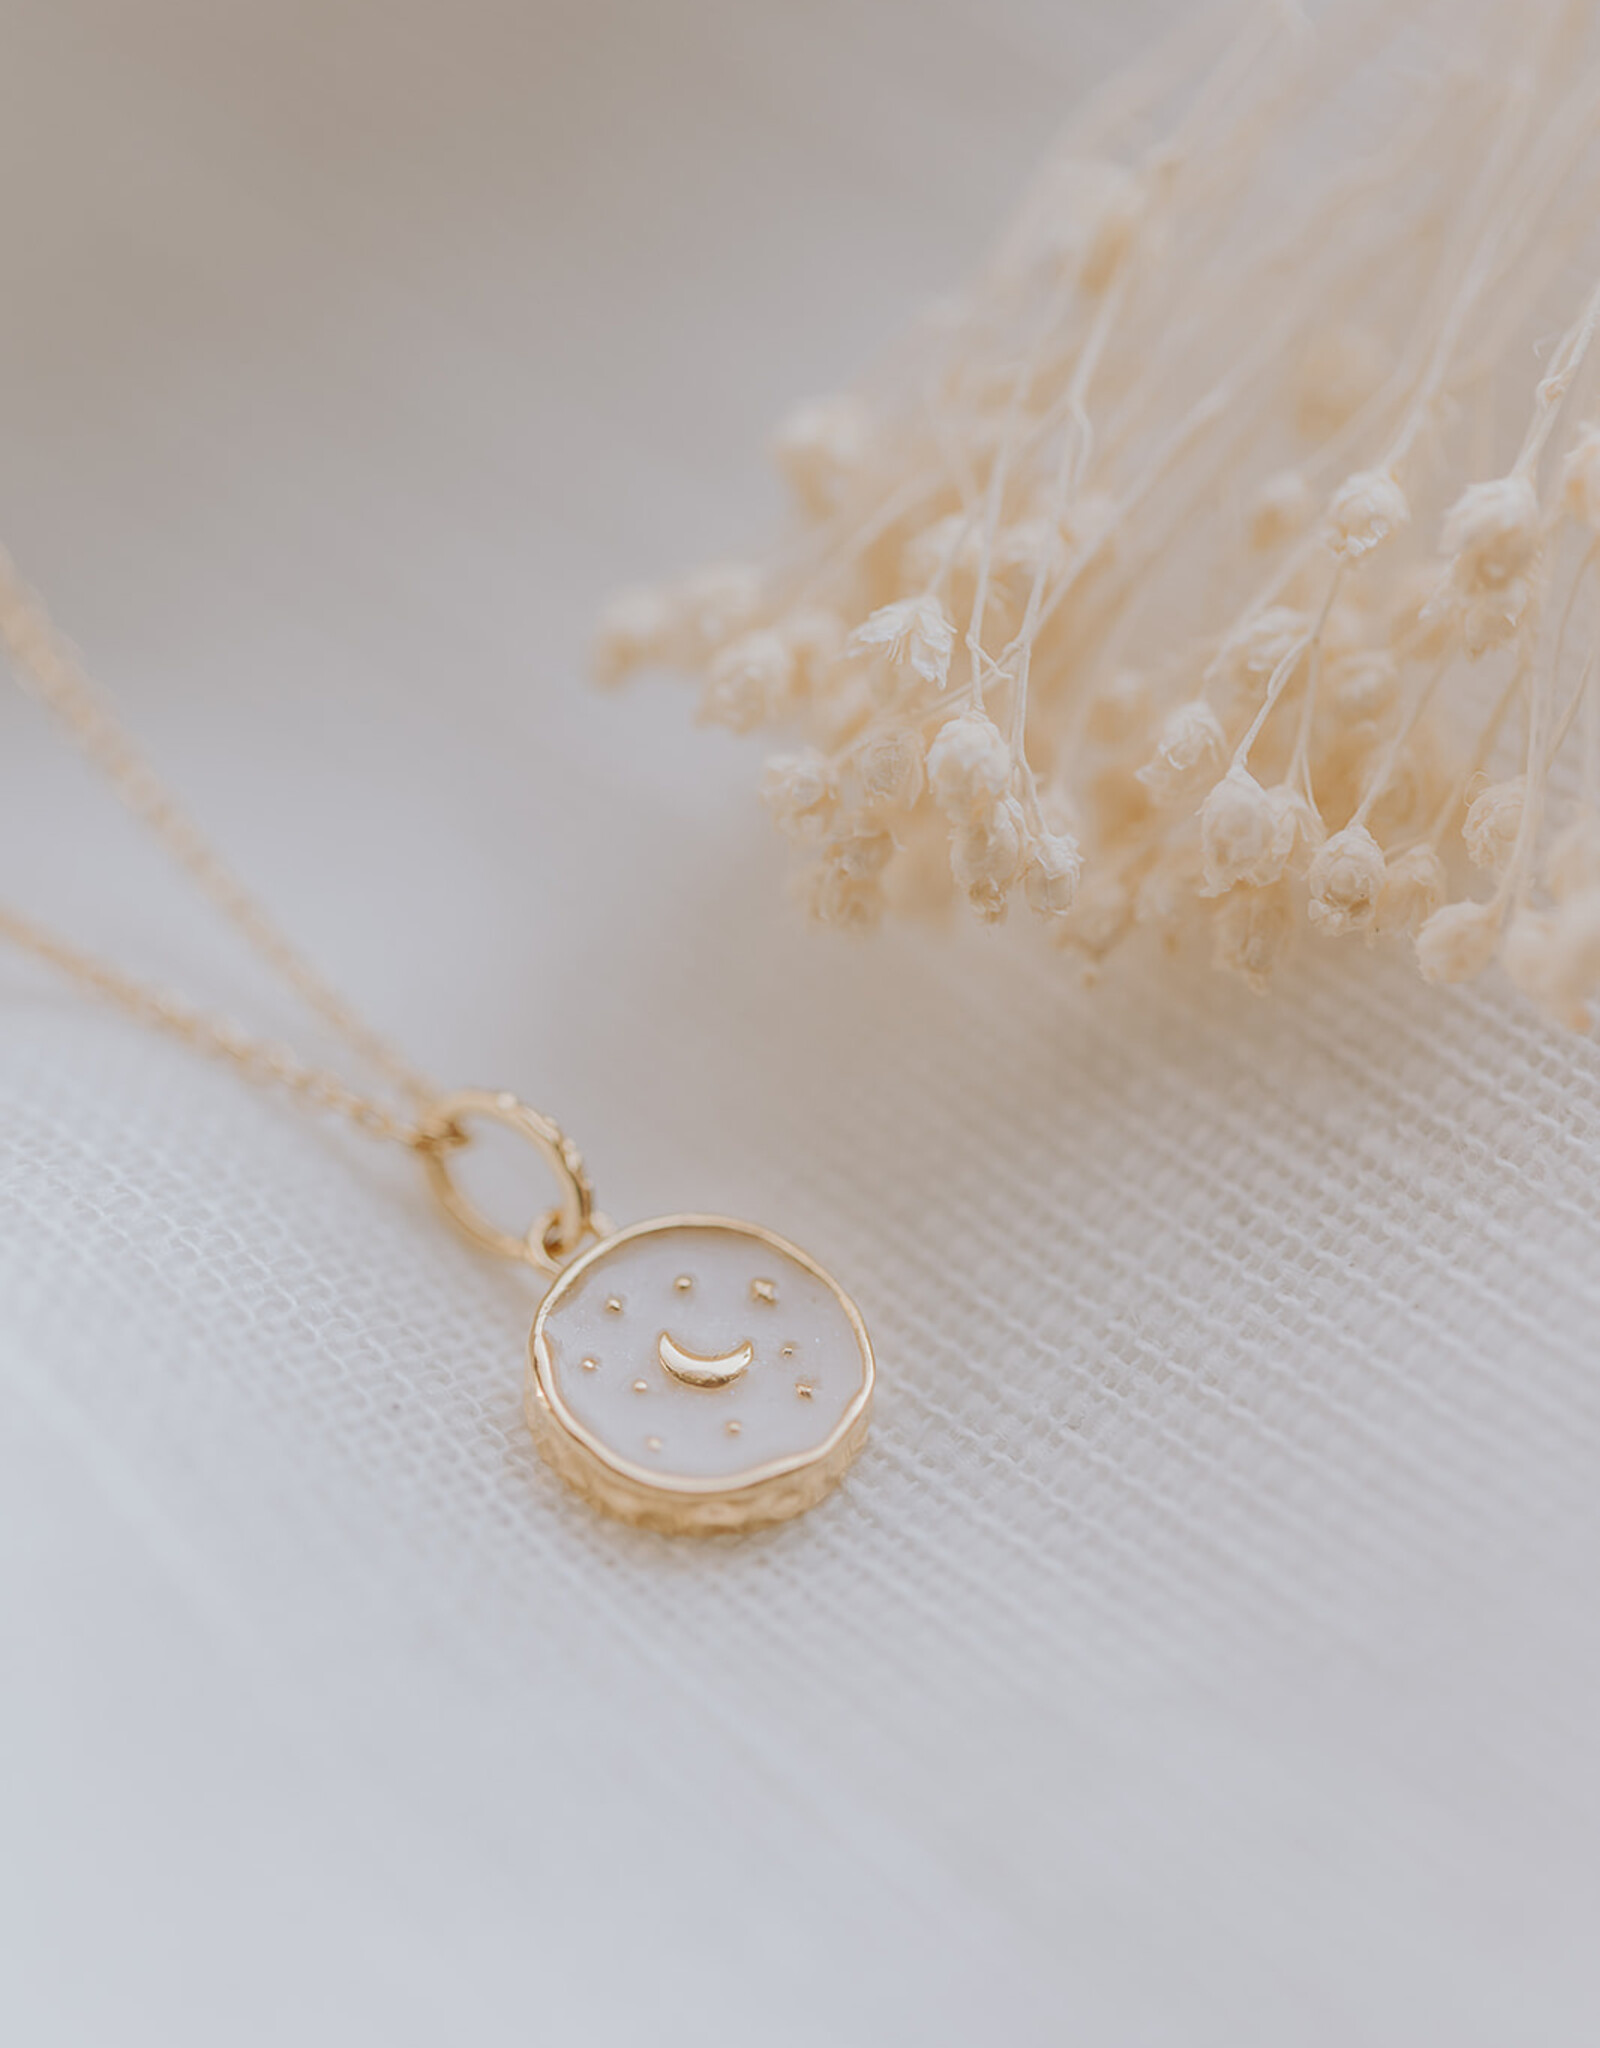 Breastmilk necklace with moon and stars